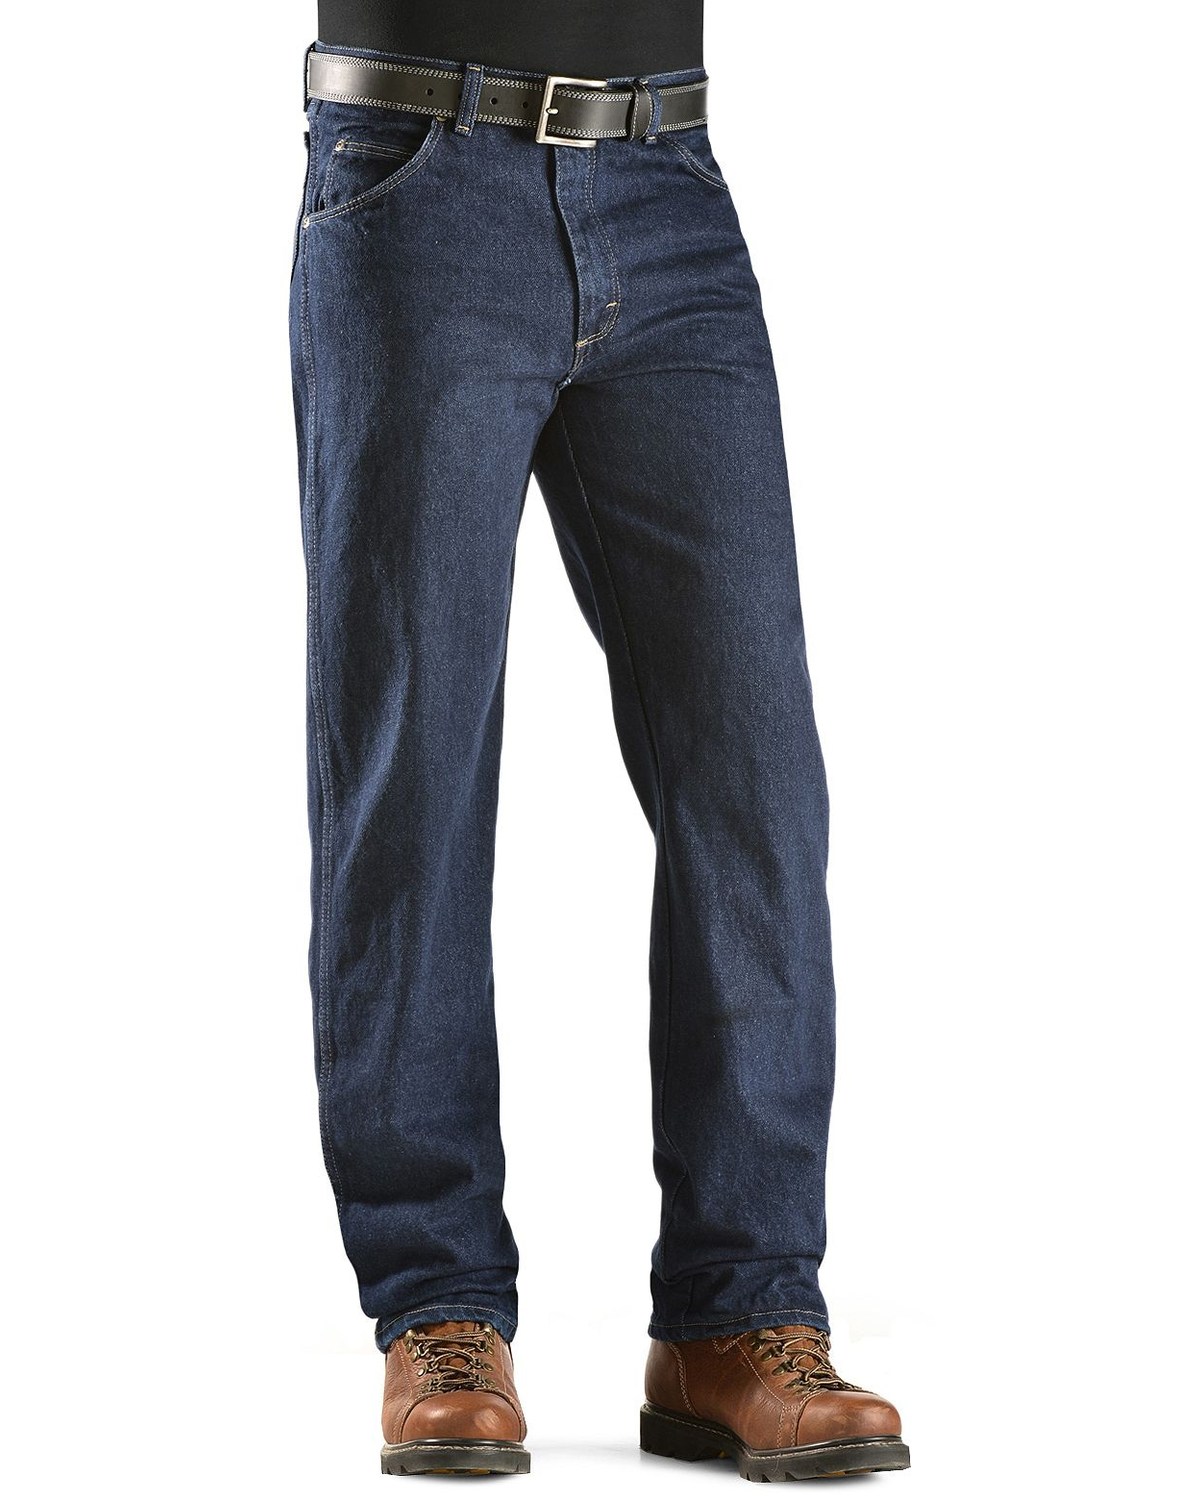 Wrangler Rugged Wear Classic Fit Jeans | Boot Barn